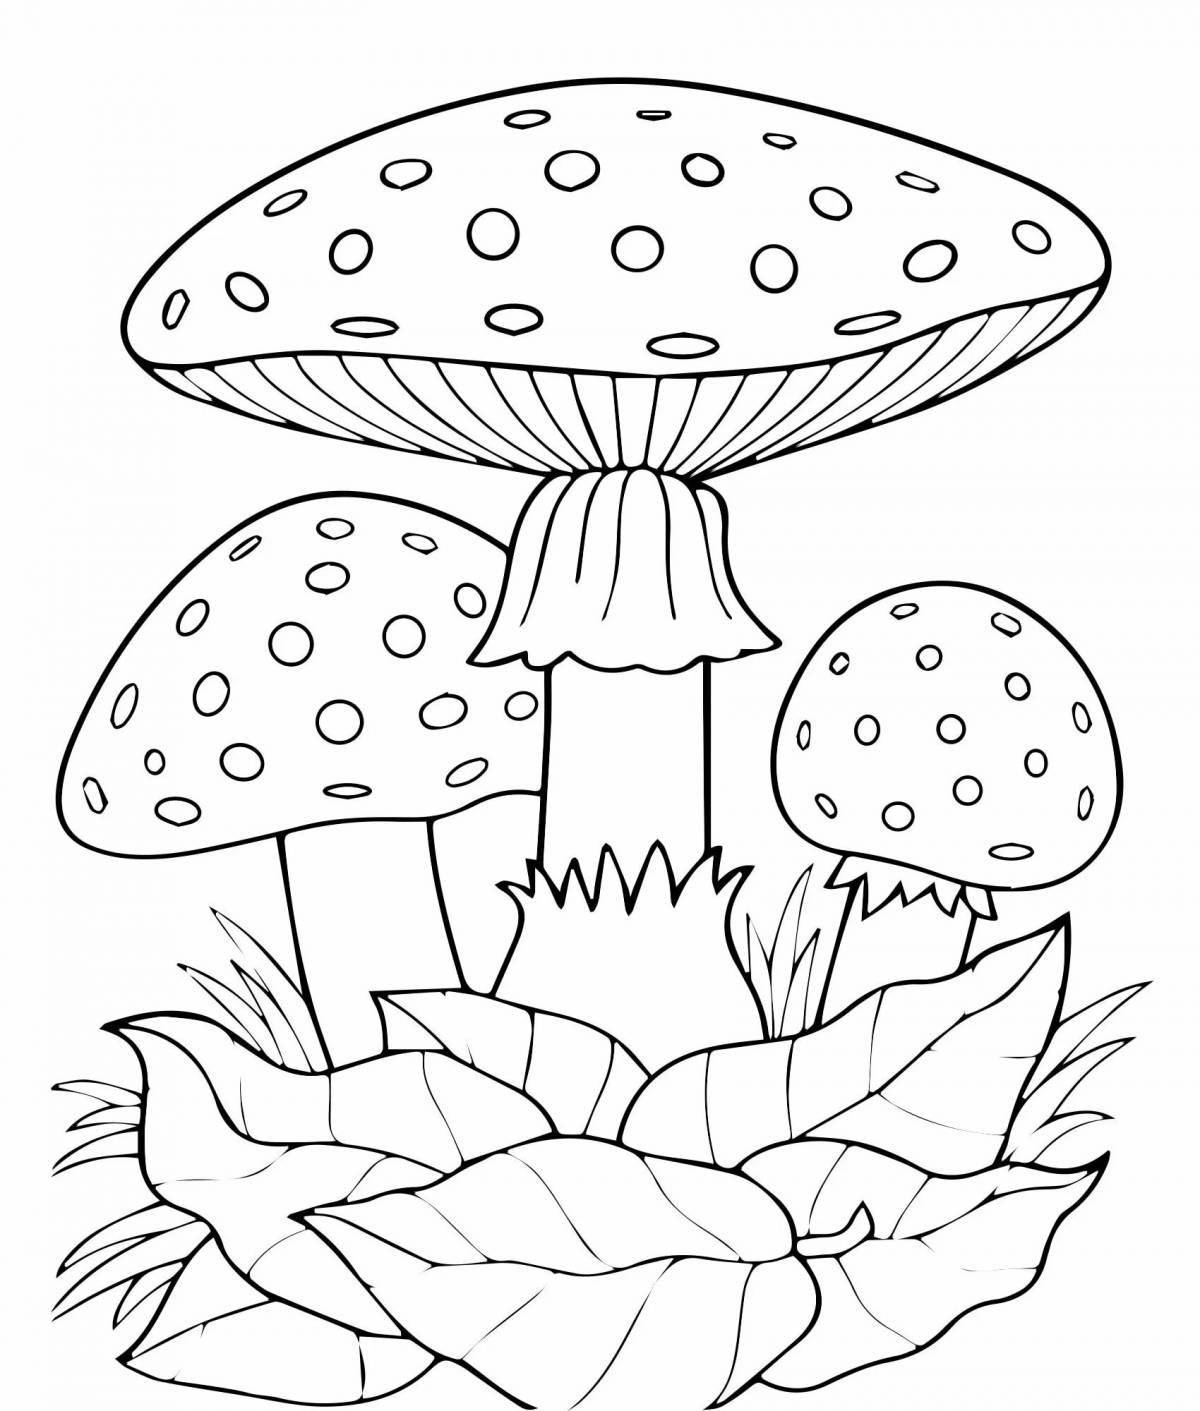 Excellent fly agaric drawing for students